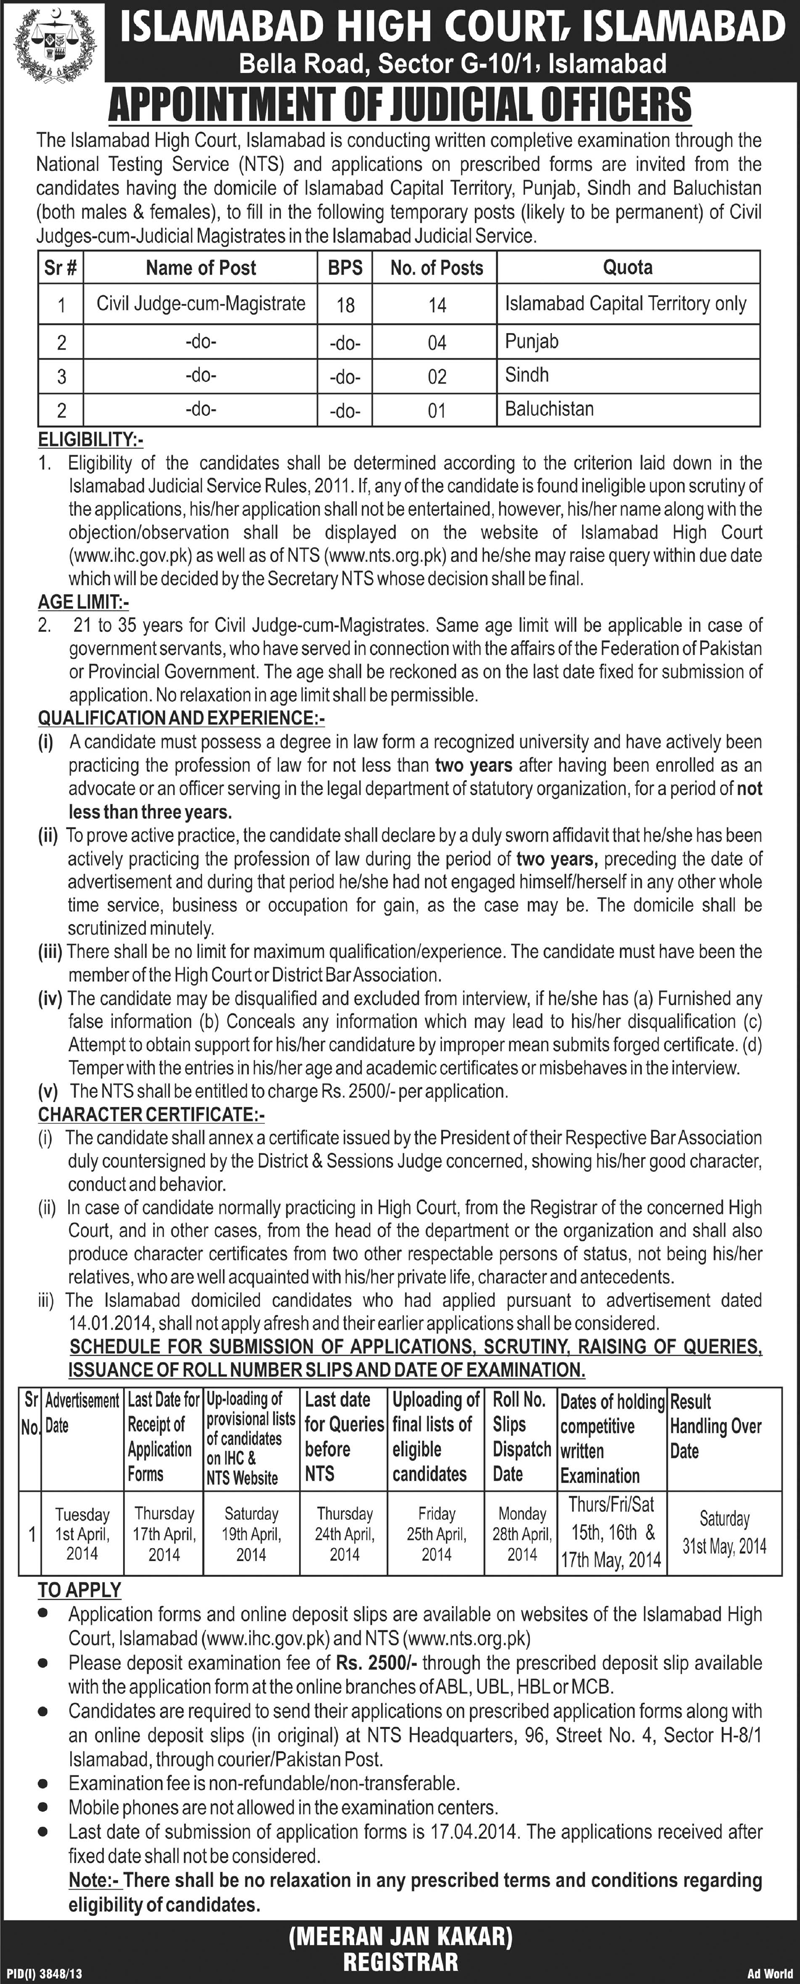 Islamabad High Court Jobs 2014 April for Judicial Officers through NTS